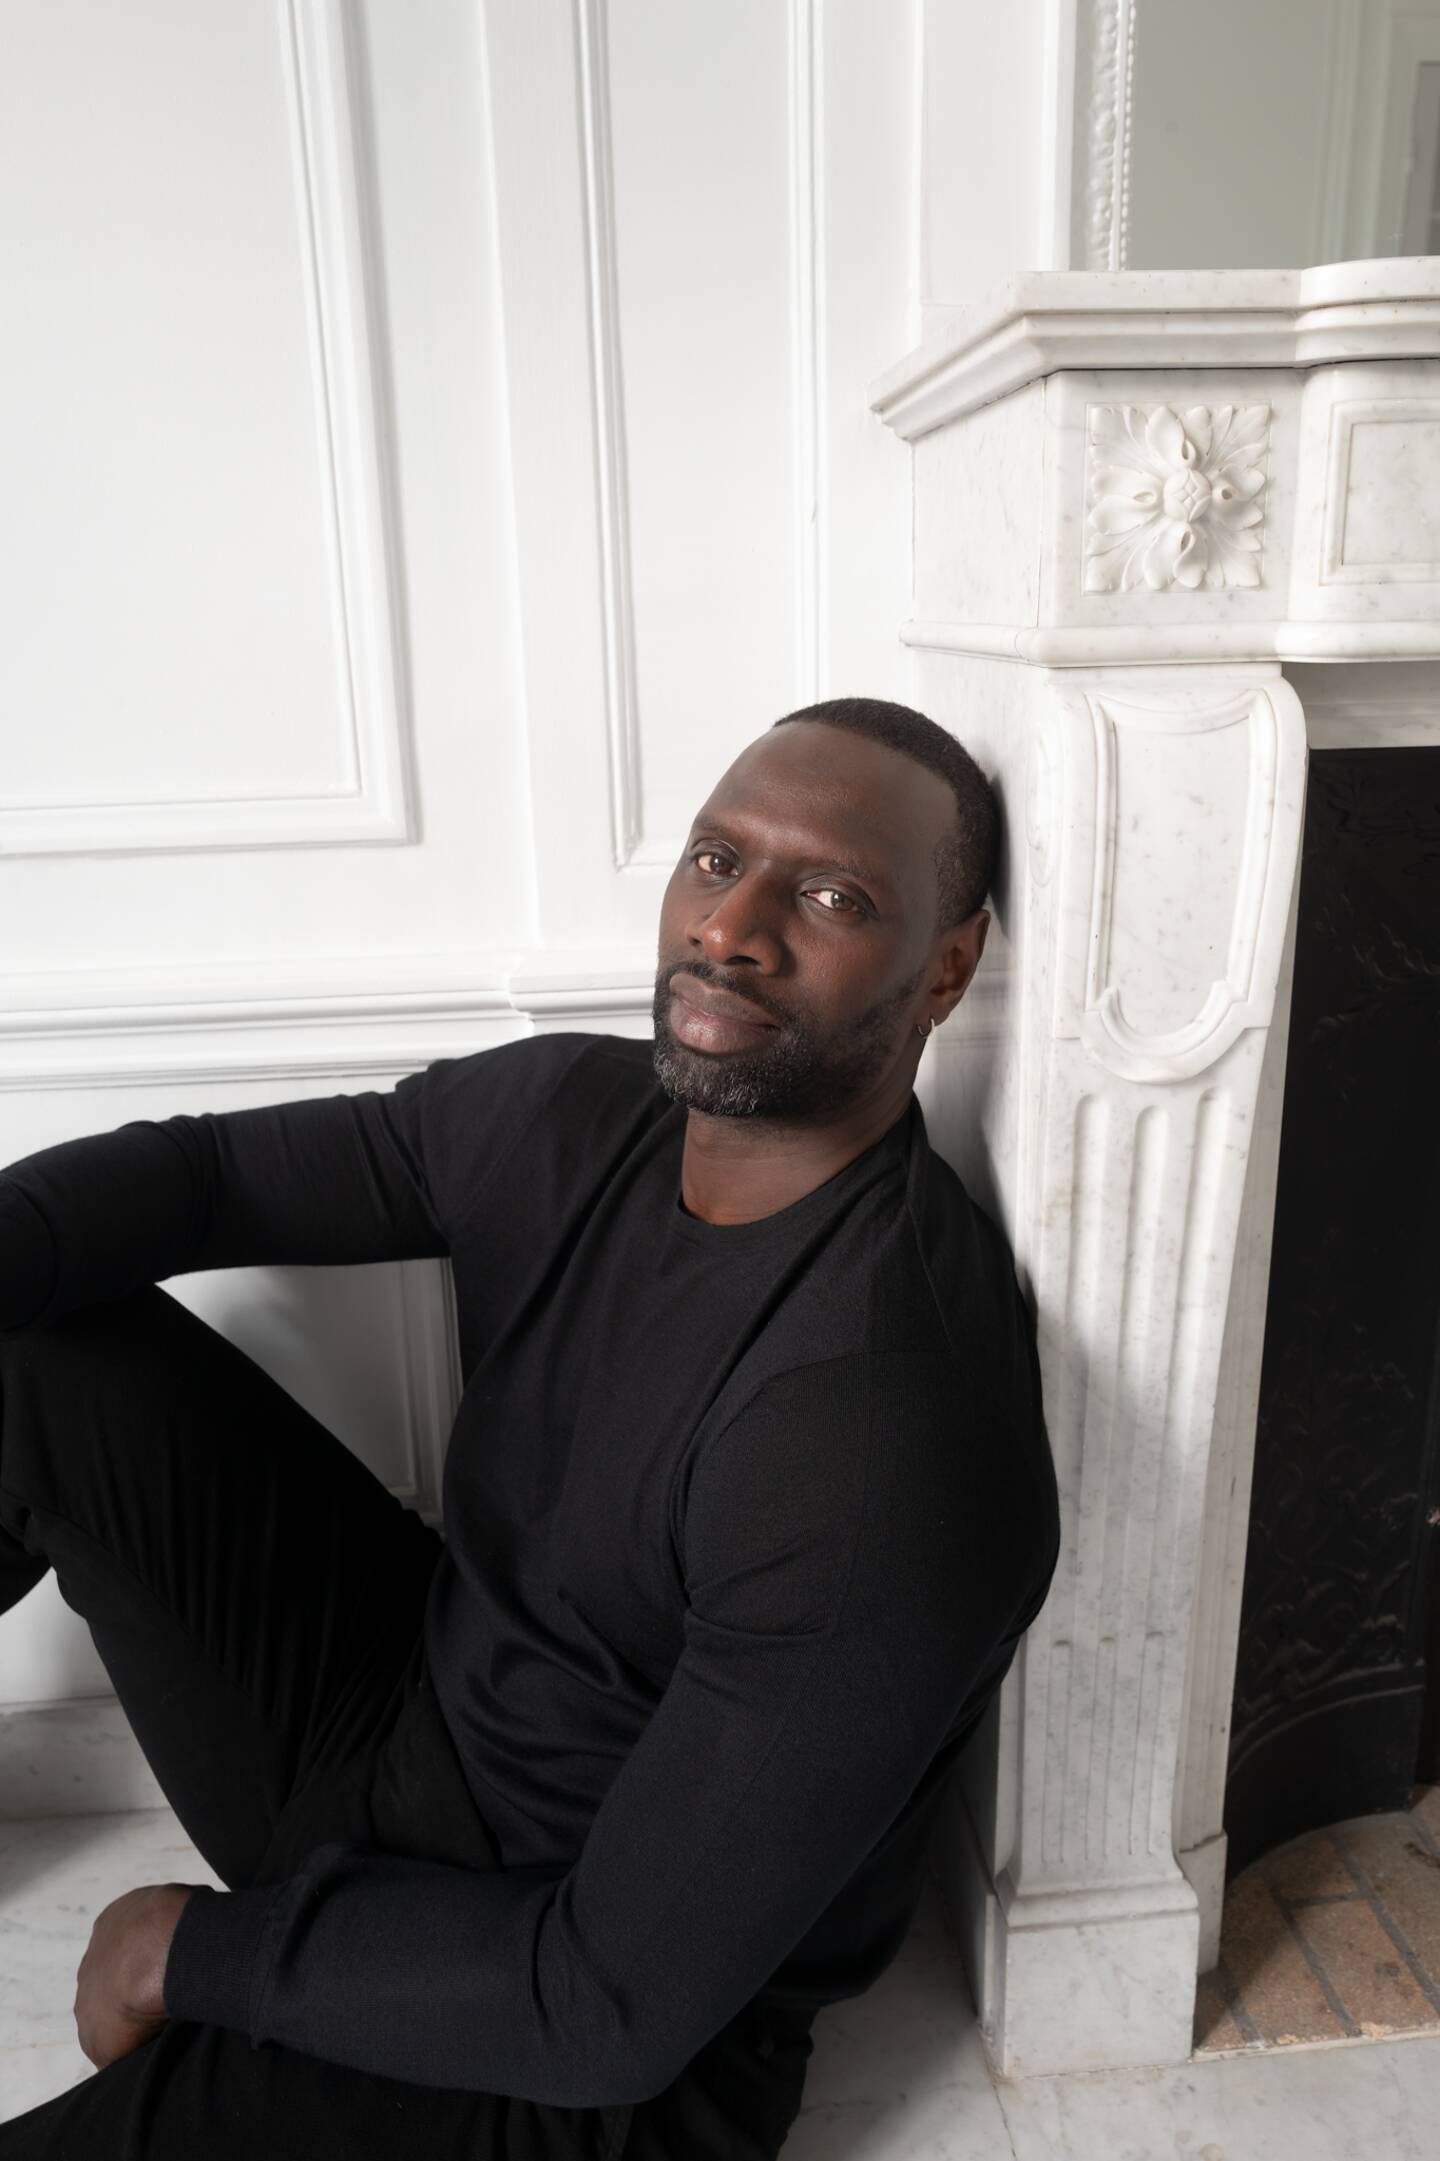 Omar Sy sort "Viens, on se parle", aux éditions Selly Sy.	